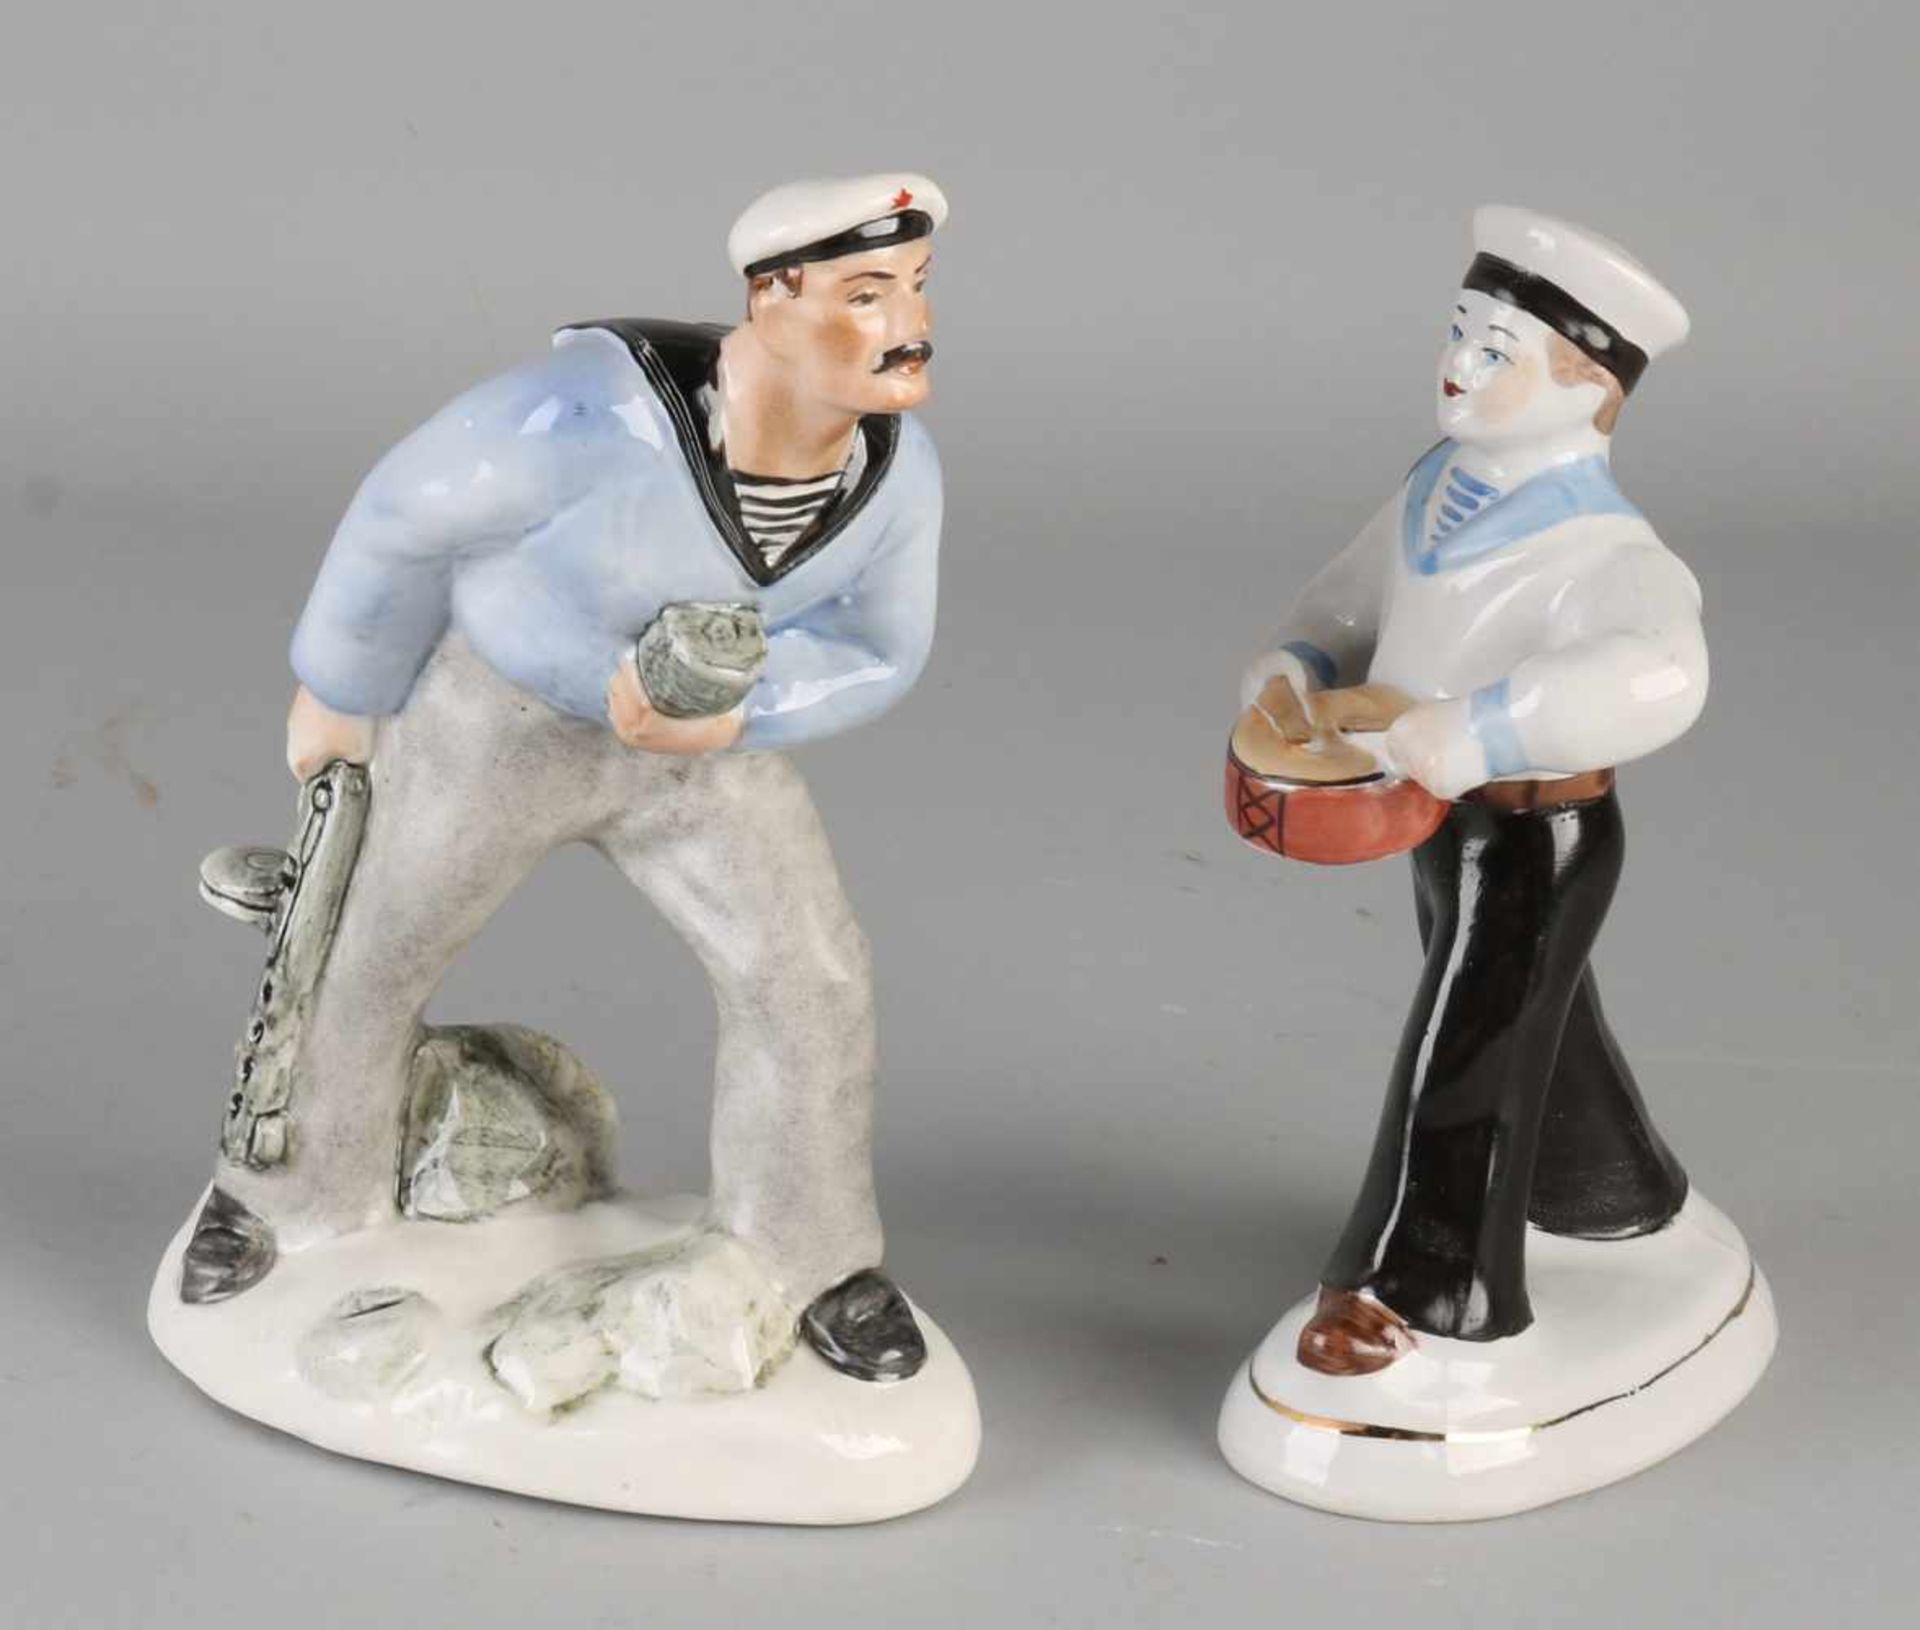 Two old Russian porcelain figures. One times sailor with drum. One sailor times with machine gun (